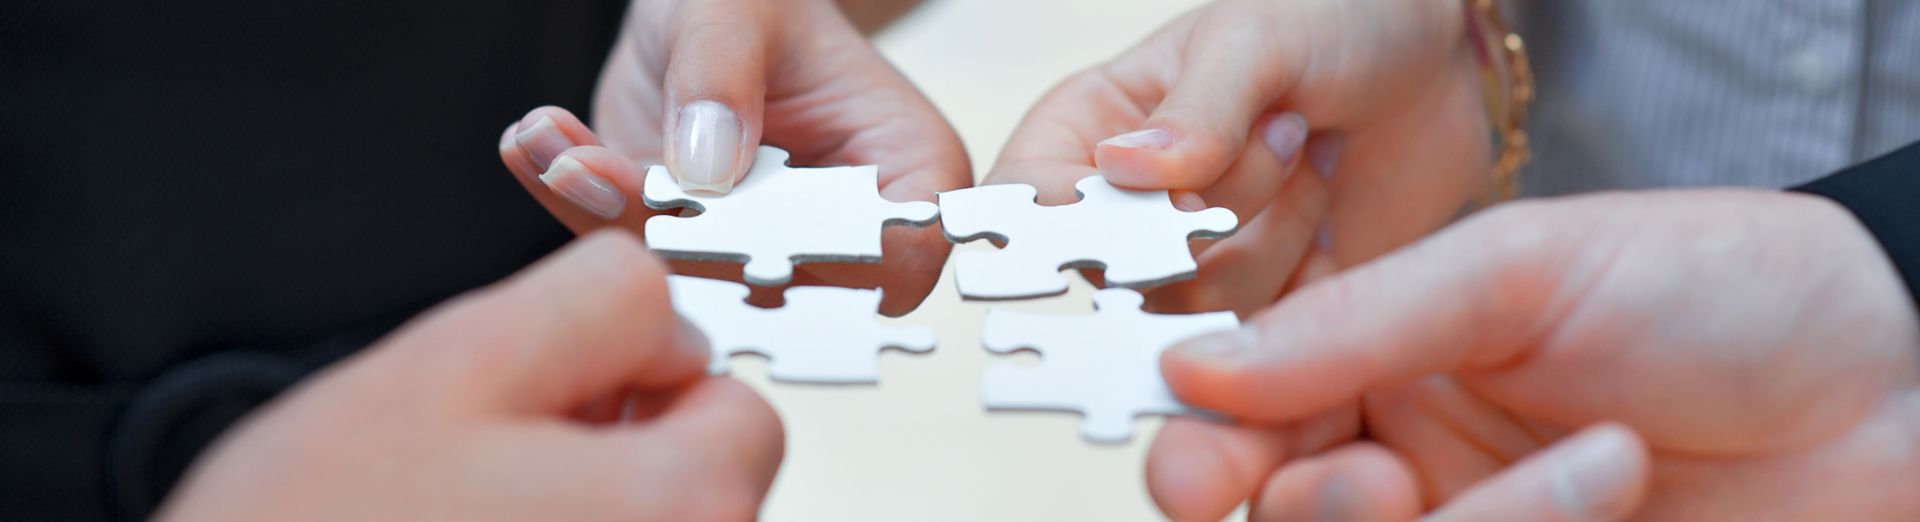 Image of four hands holding puzzle pieces